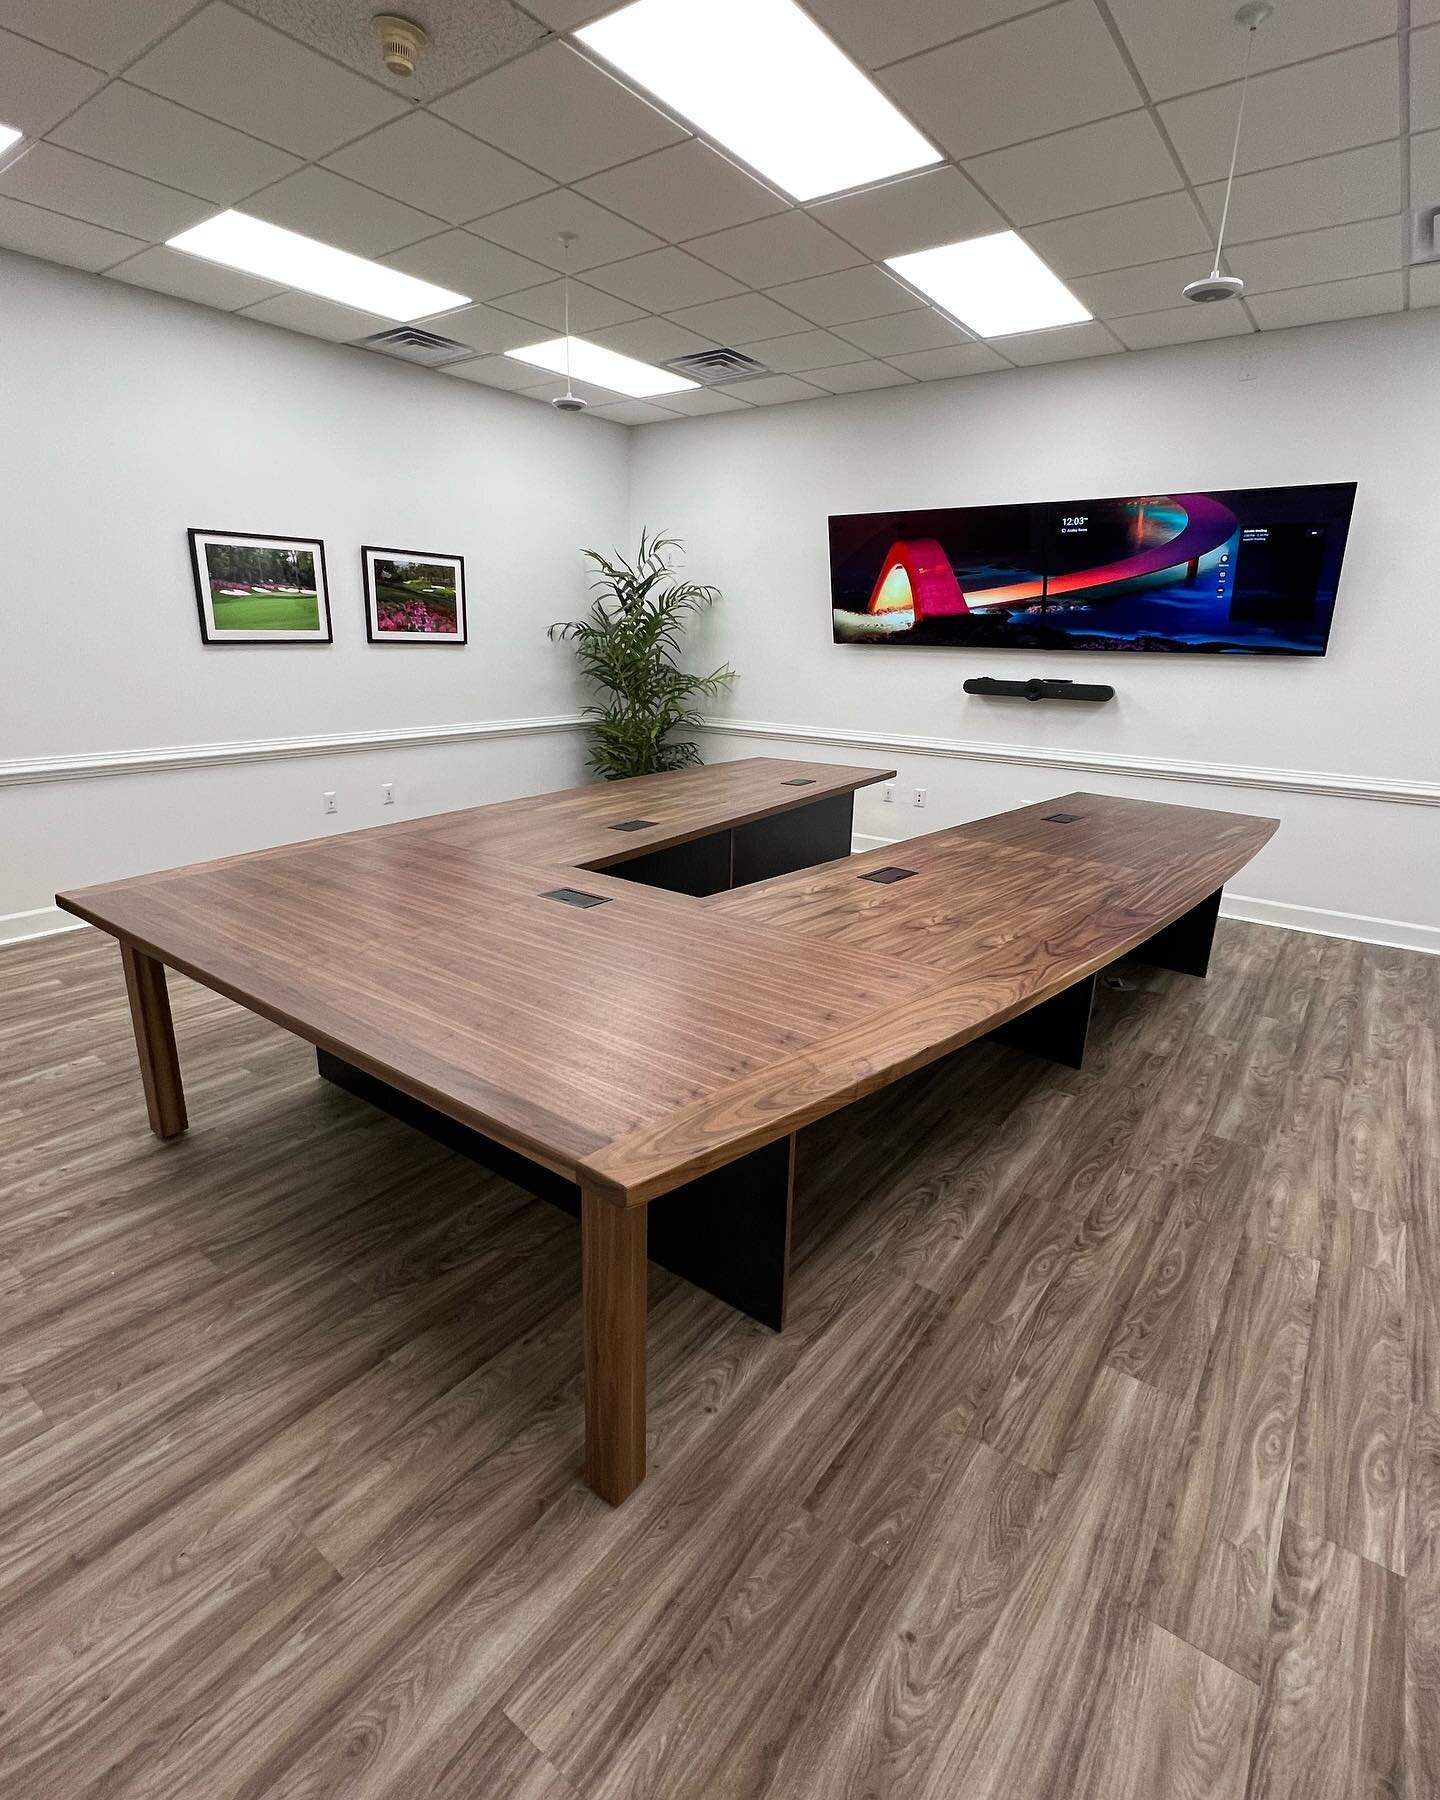 Walnut and black is a classic combo. Our friends at Prayon have a stunning new conference table to impress their clients. 
&bull;
Looks aren&rsquo;t everything but as a business, your potential customers may only look once. Make that first impression